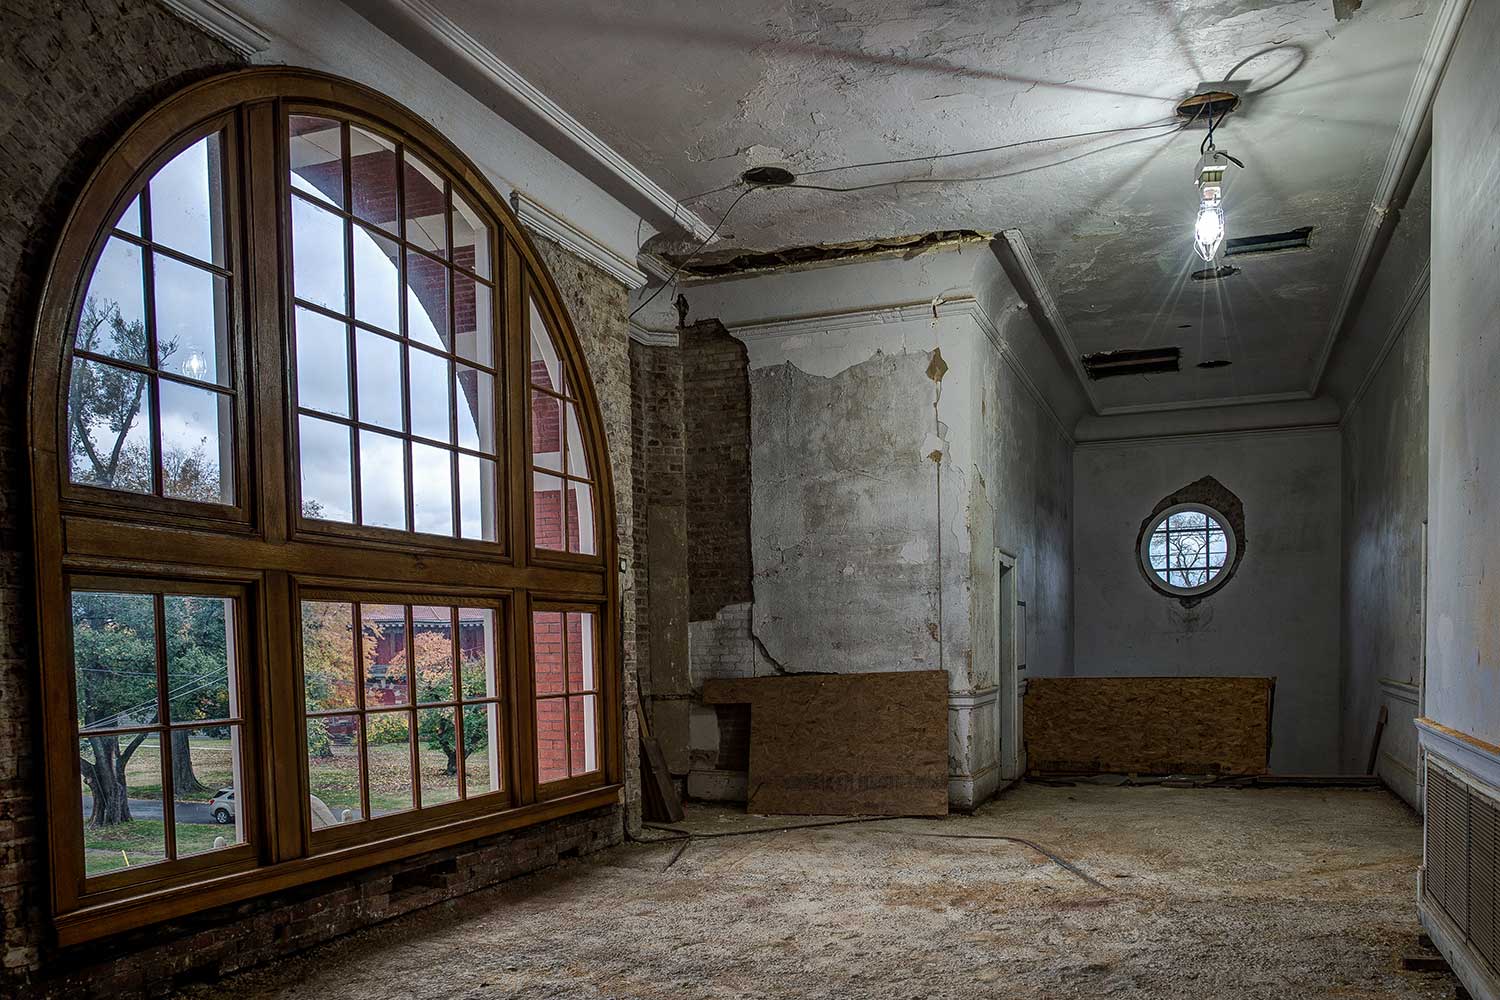 St. Elizabeths Hospital in Washington with no flooring and holes in the wall